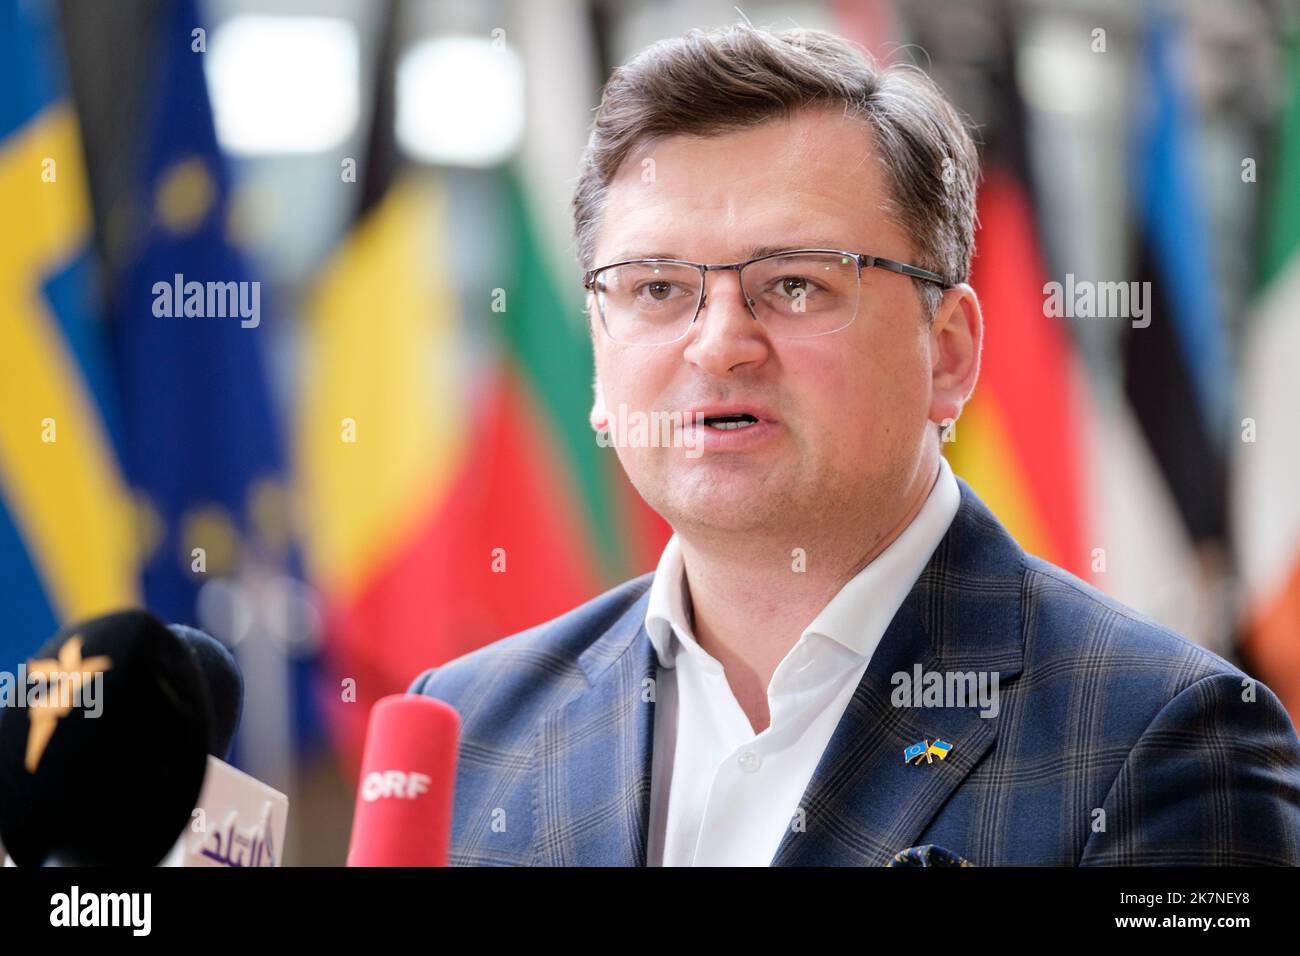 Belgium, Brussels, on May 16, 2022: Dmytro Ivanovytch Kouleba, Minister of Foreign Affairs, attending a meeting on the war in Ukraine and relationship Stock Photo